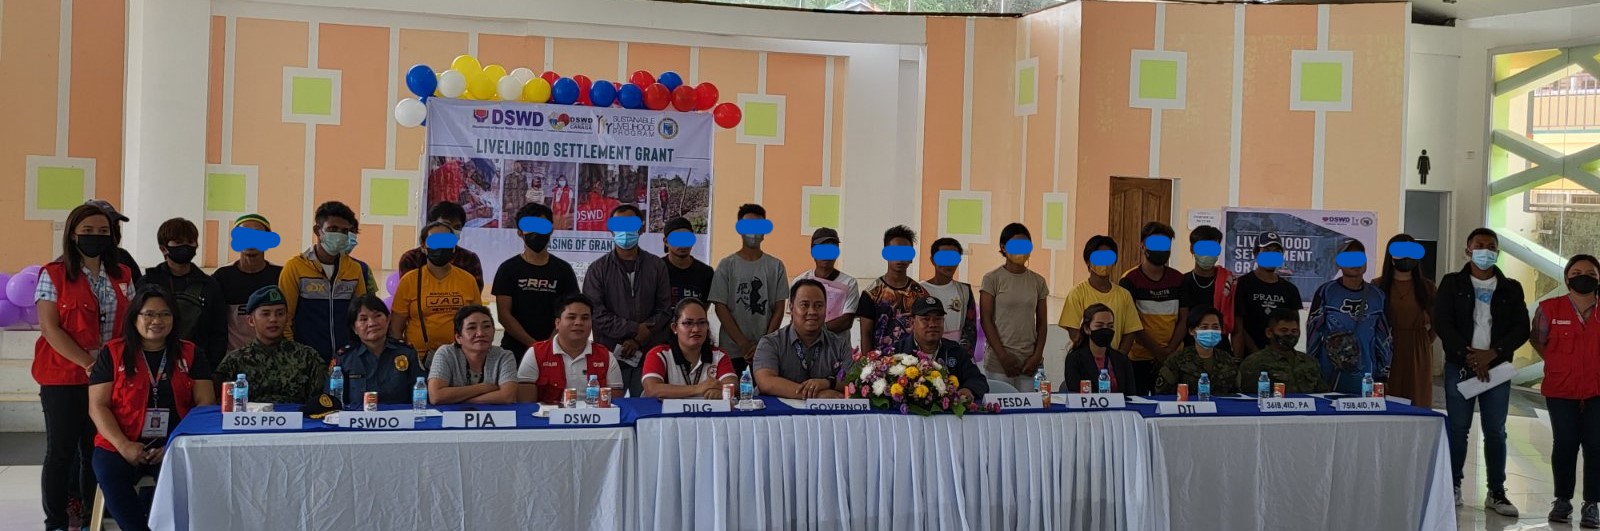 DSWD releases livelihood grants to 25 FR-beneficiaries in SurSur